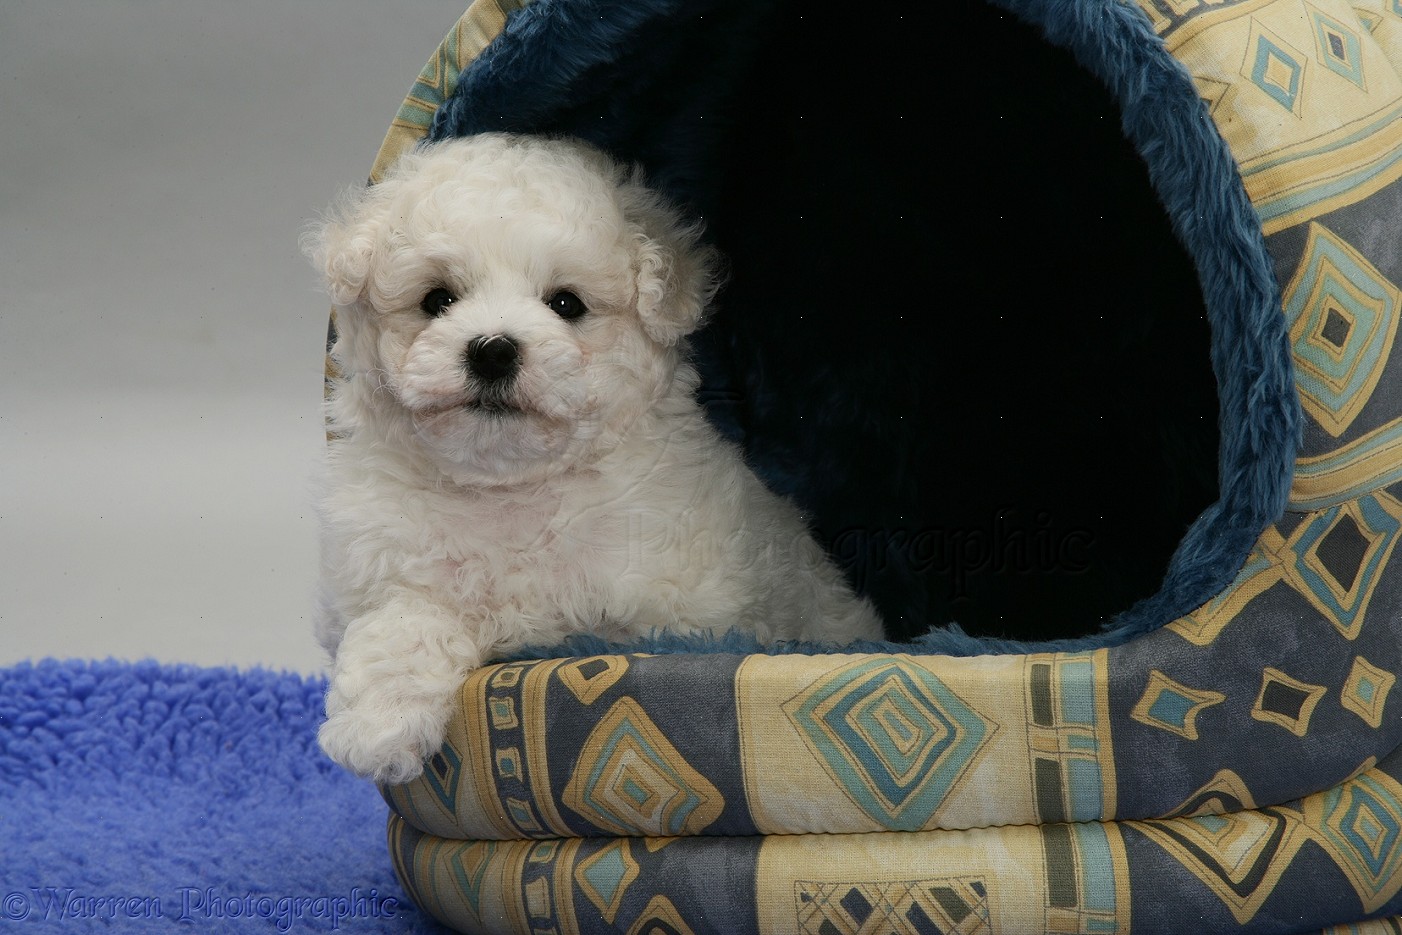 Dog Cute Bichon Frise pup in an igloo bed photo WP37945